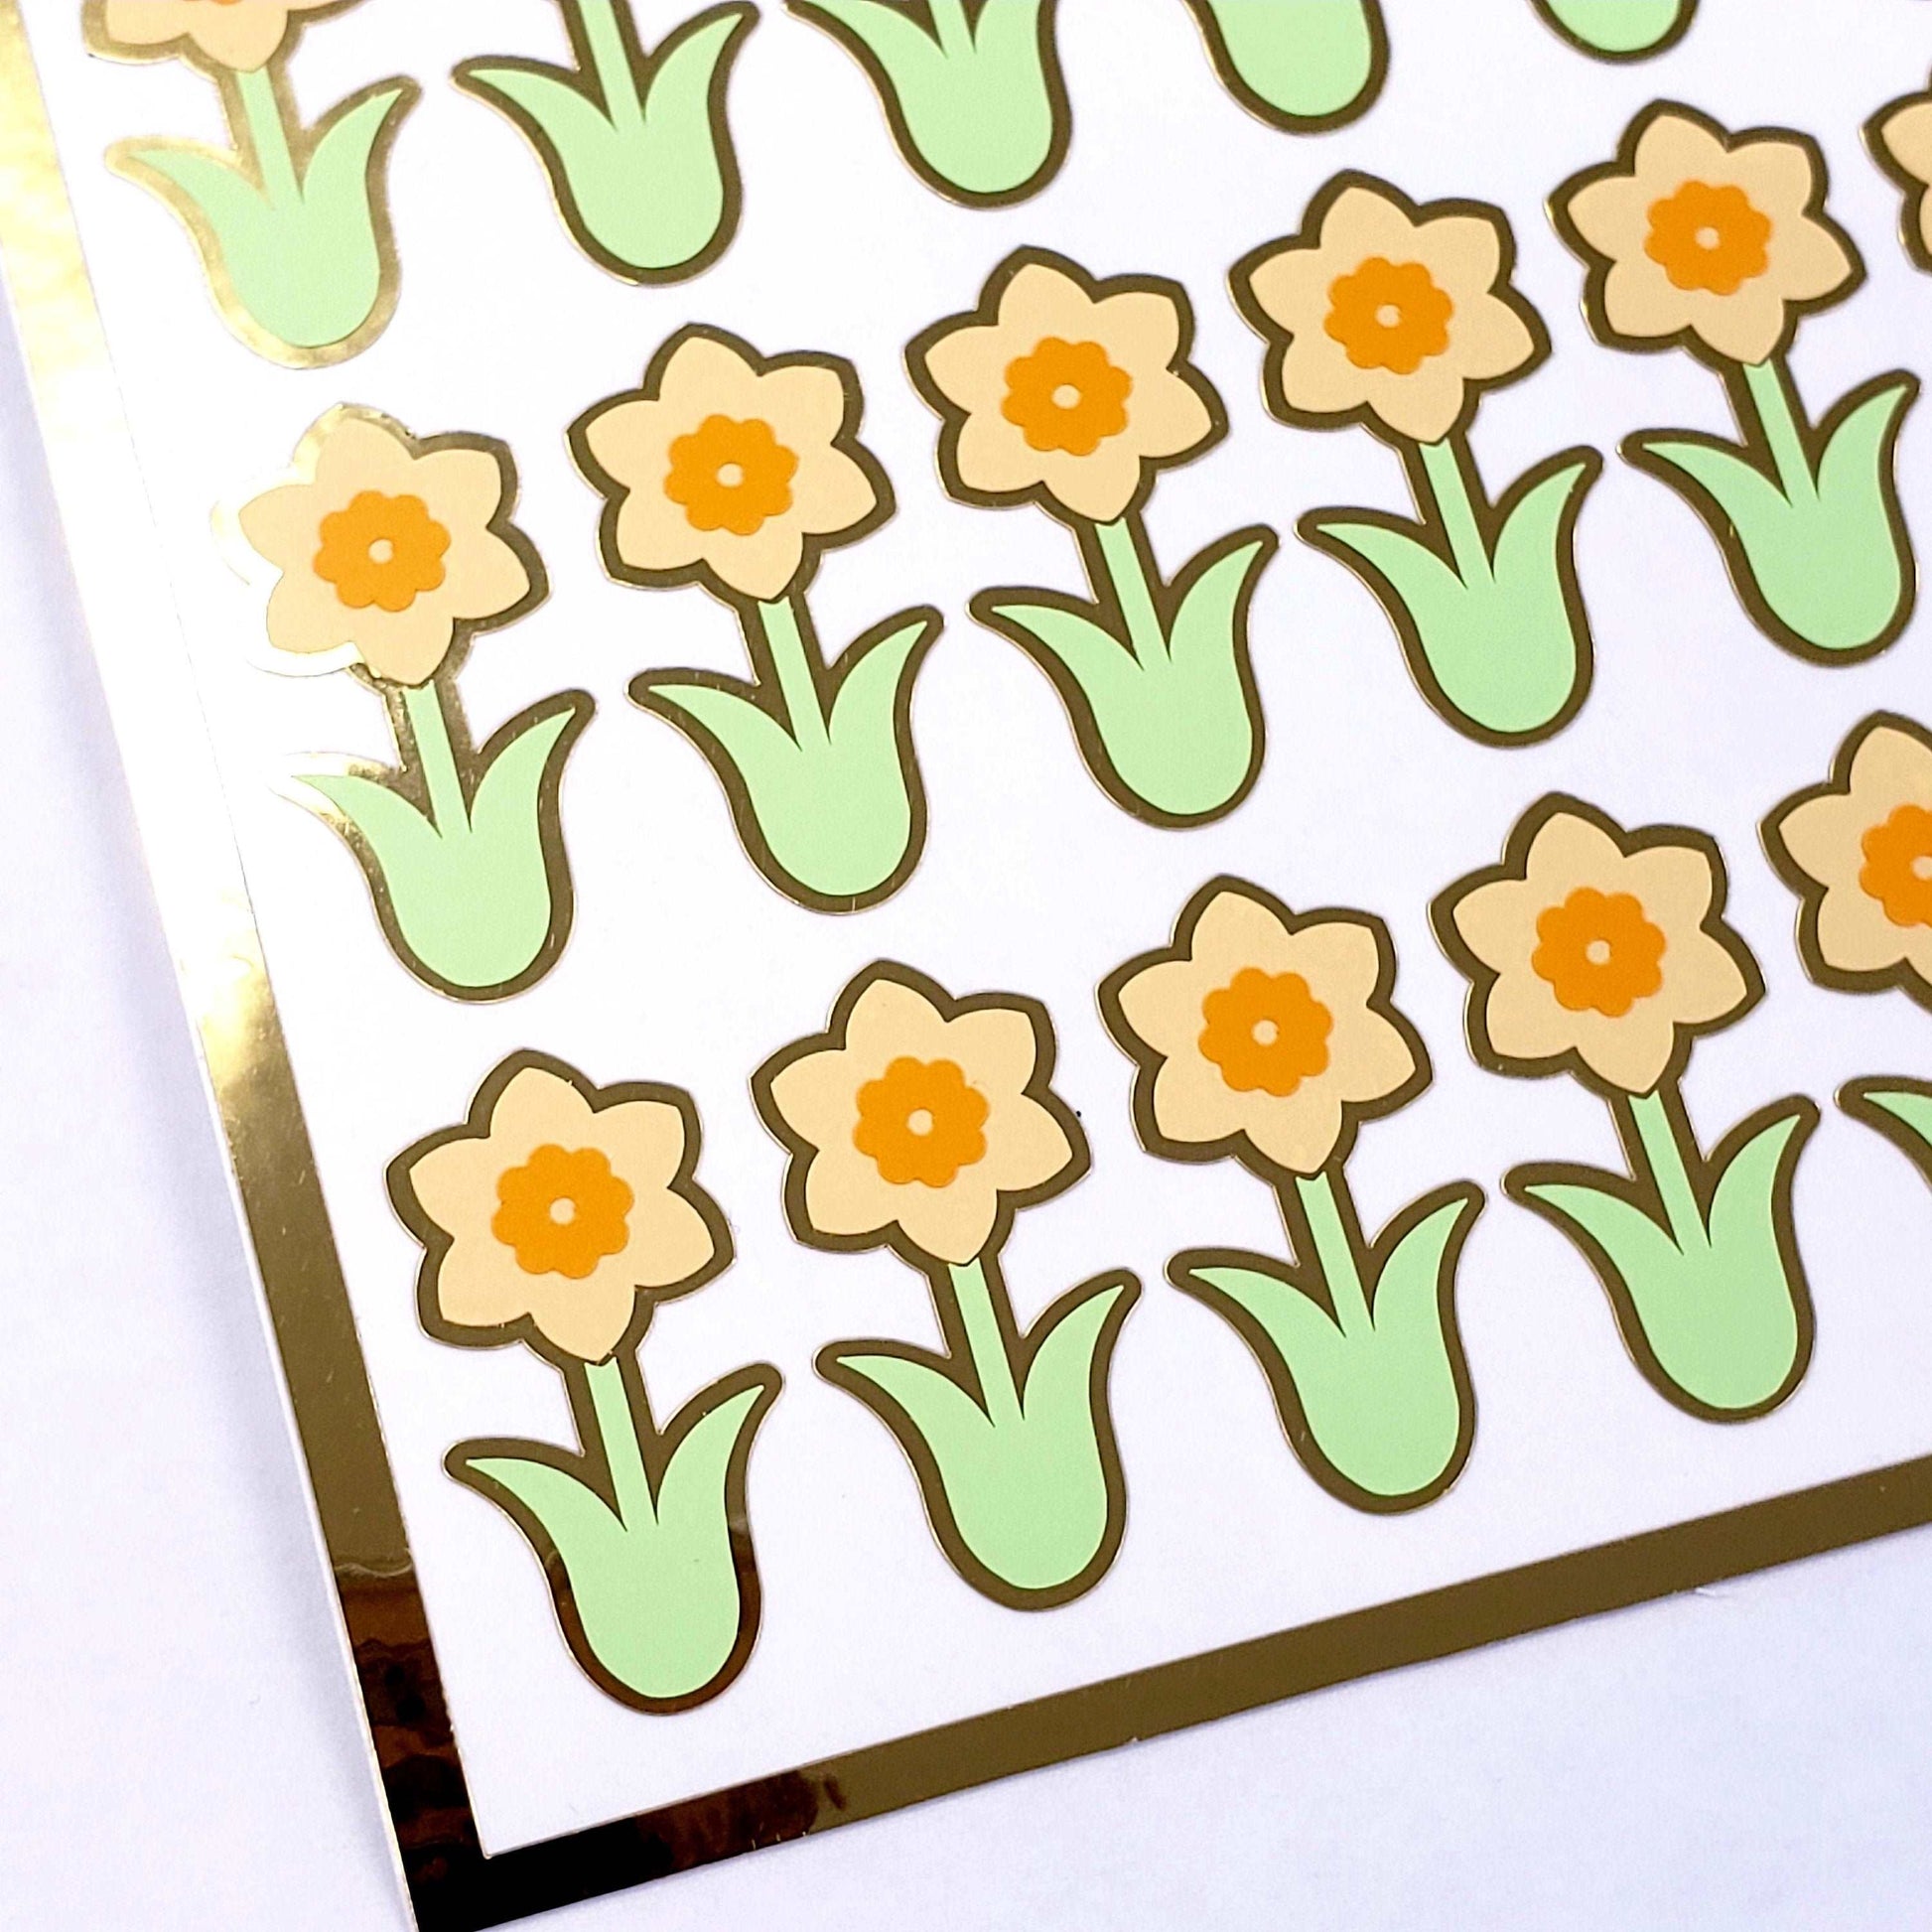 Pastel Yellow Daffodil Stickers, set of 35 flower decals for Easter, Mother's Day, Spring weddings, sticker gift for gardeners.